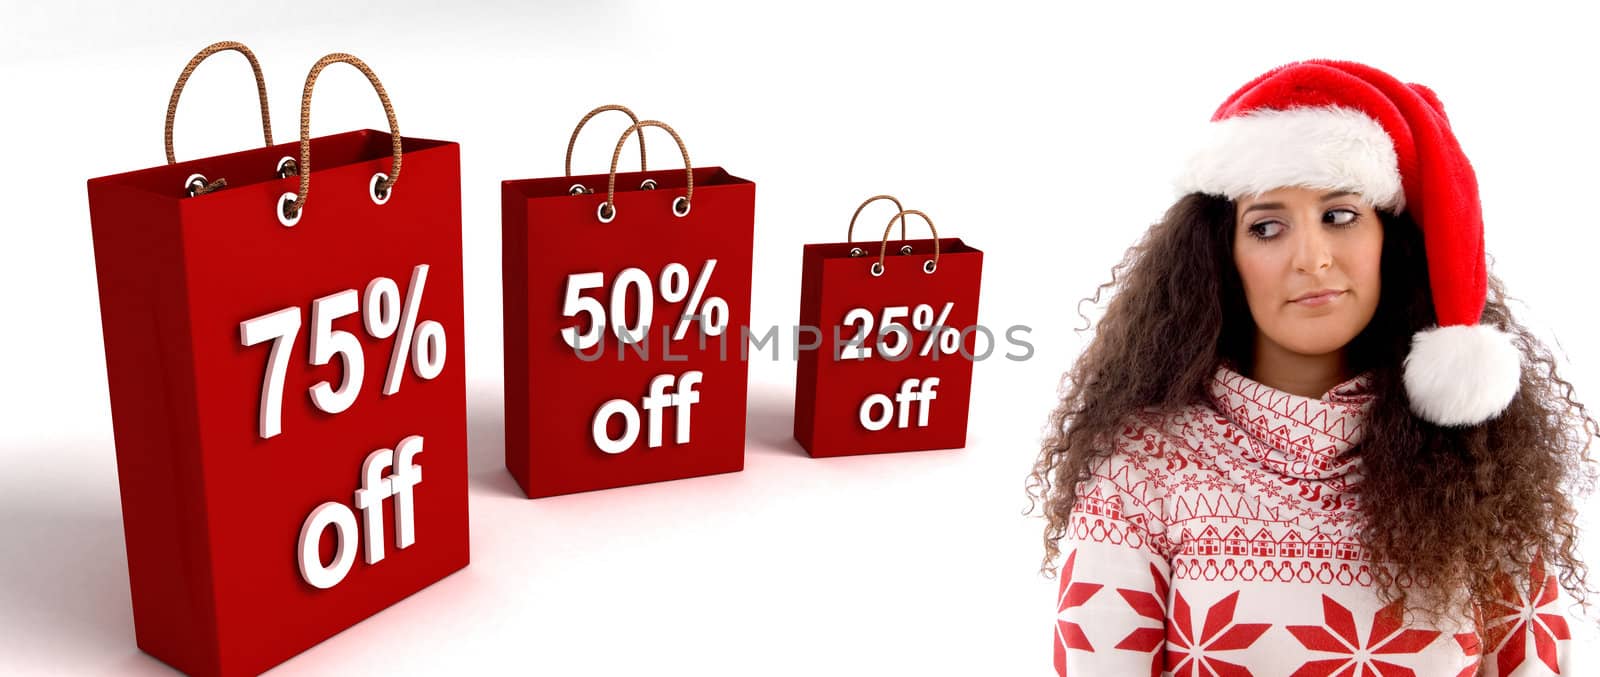 woman wearing christmas hat posing with shopping bag by imagerymajestic